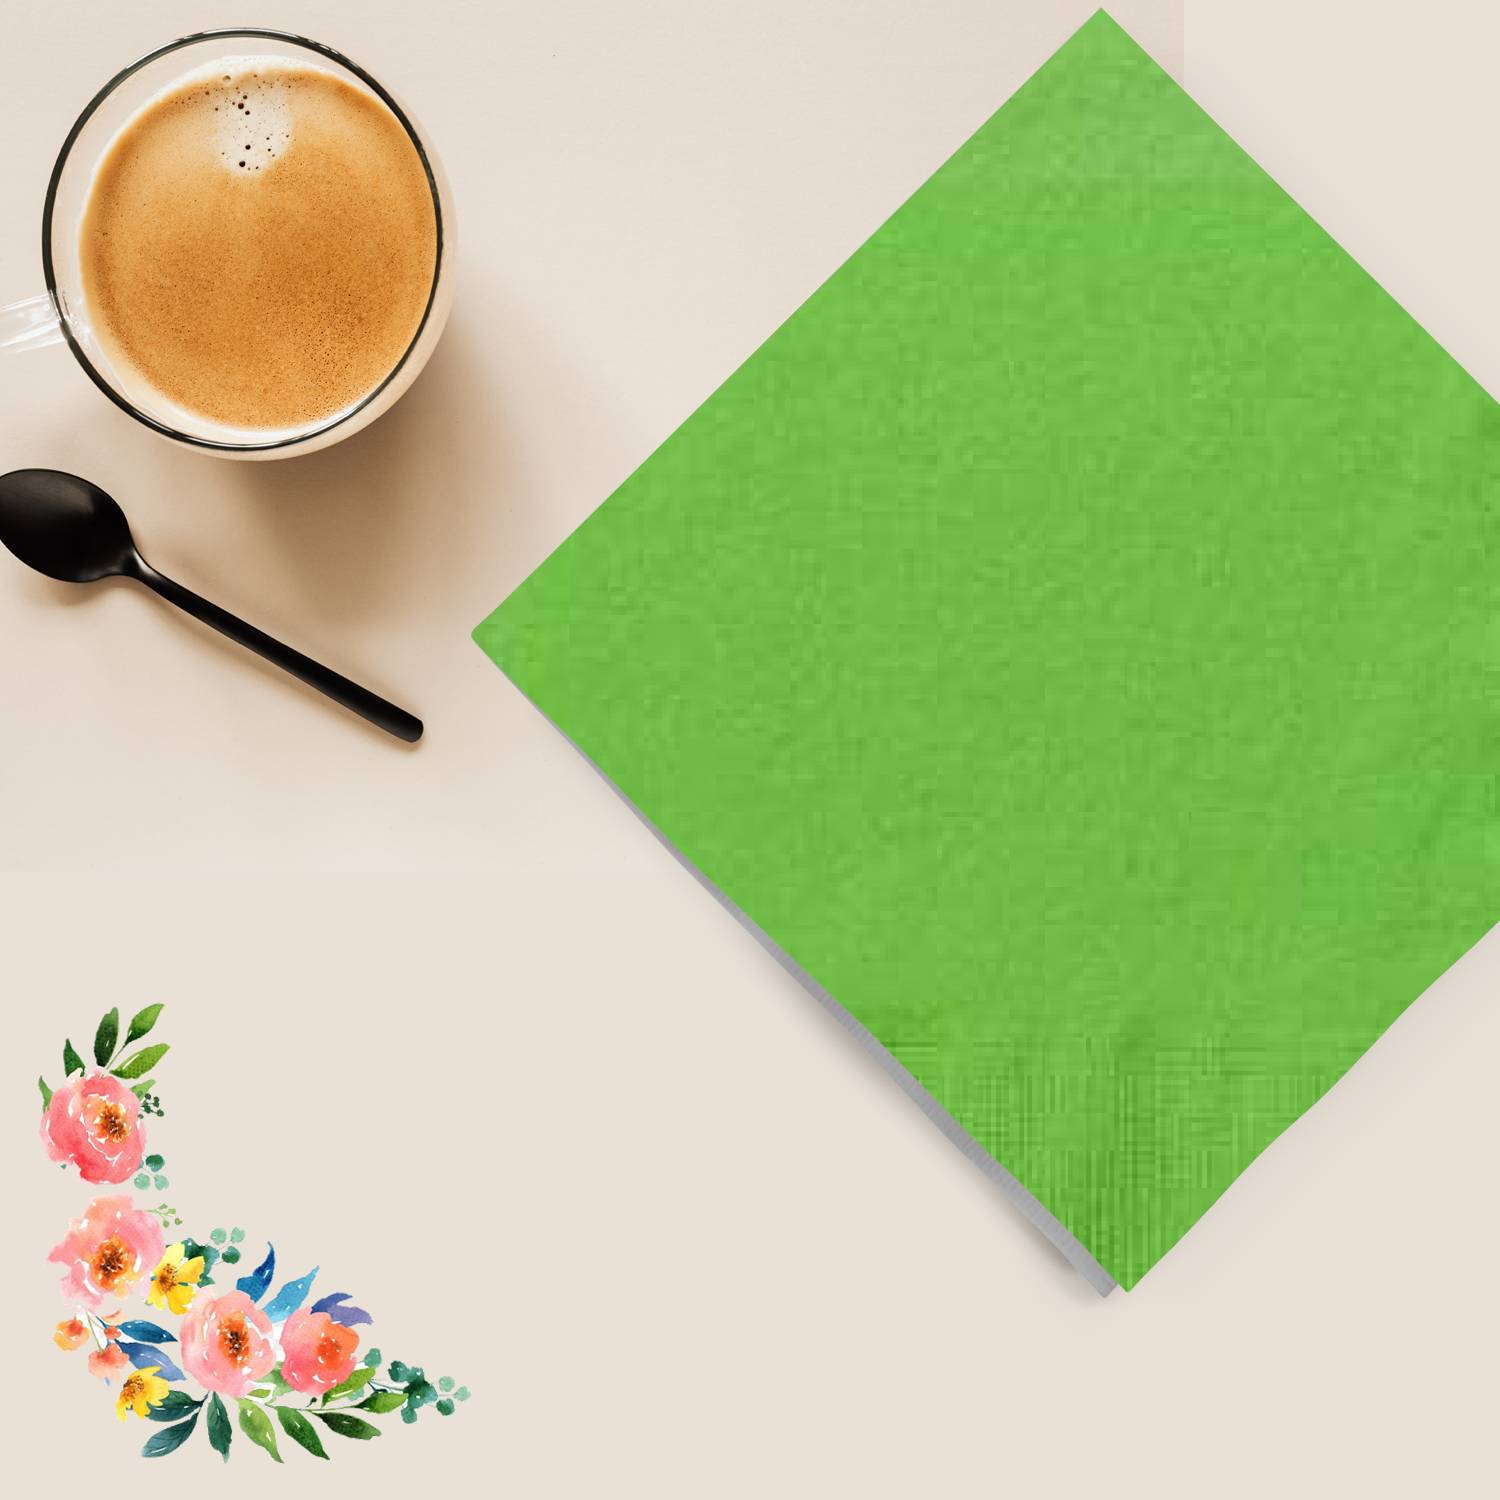 SALE Lime Green Beverage Napkins 20 count  Party Dimensions   